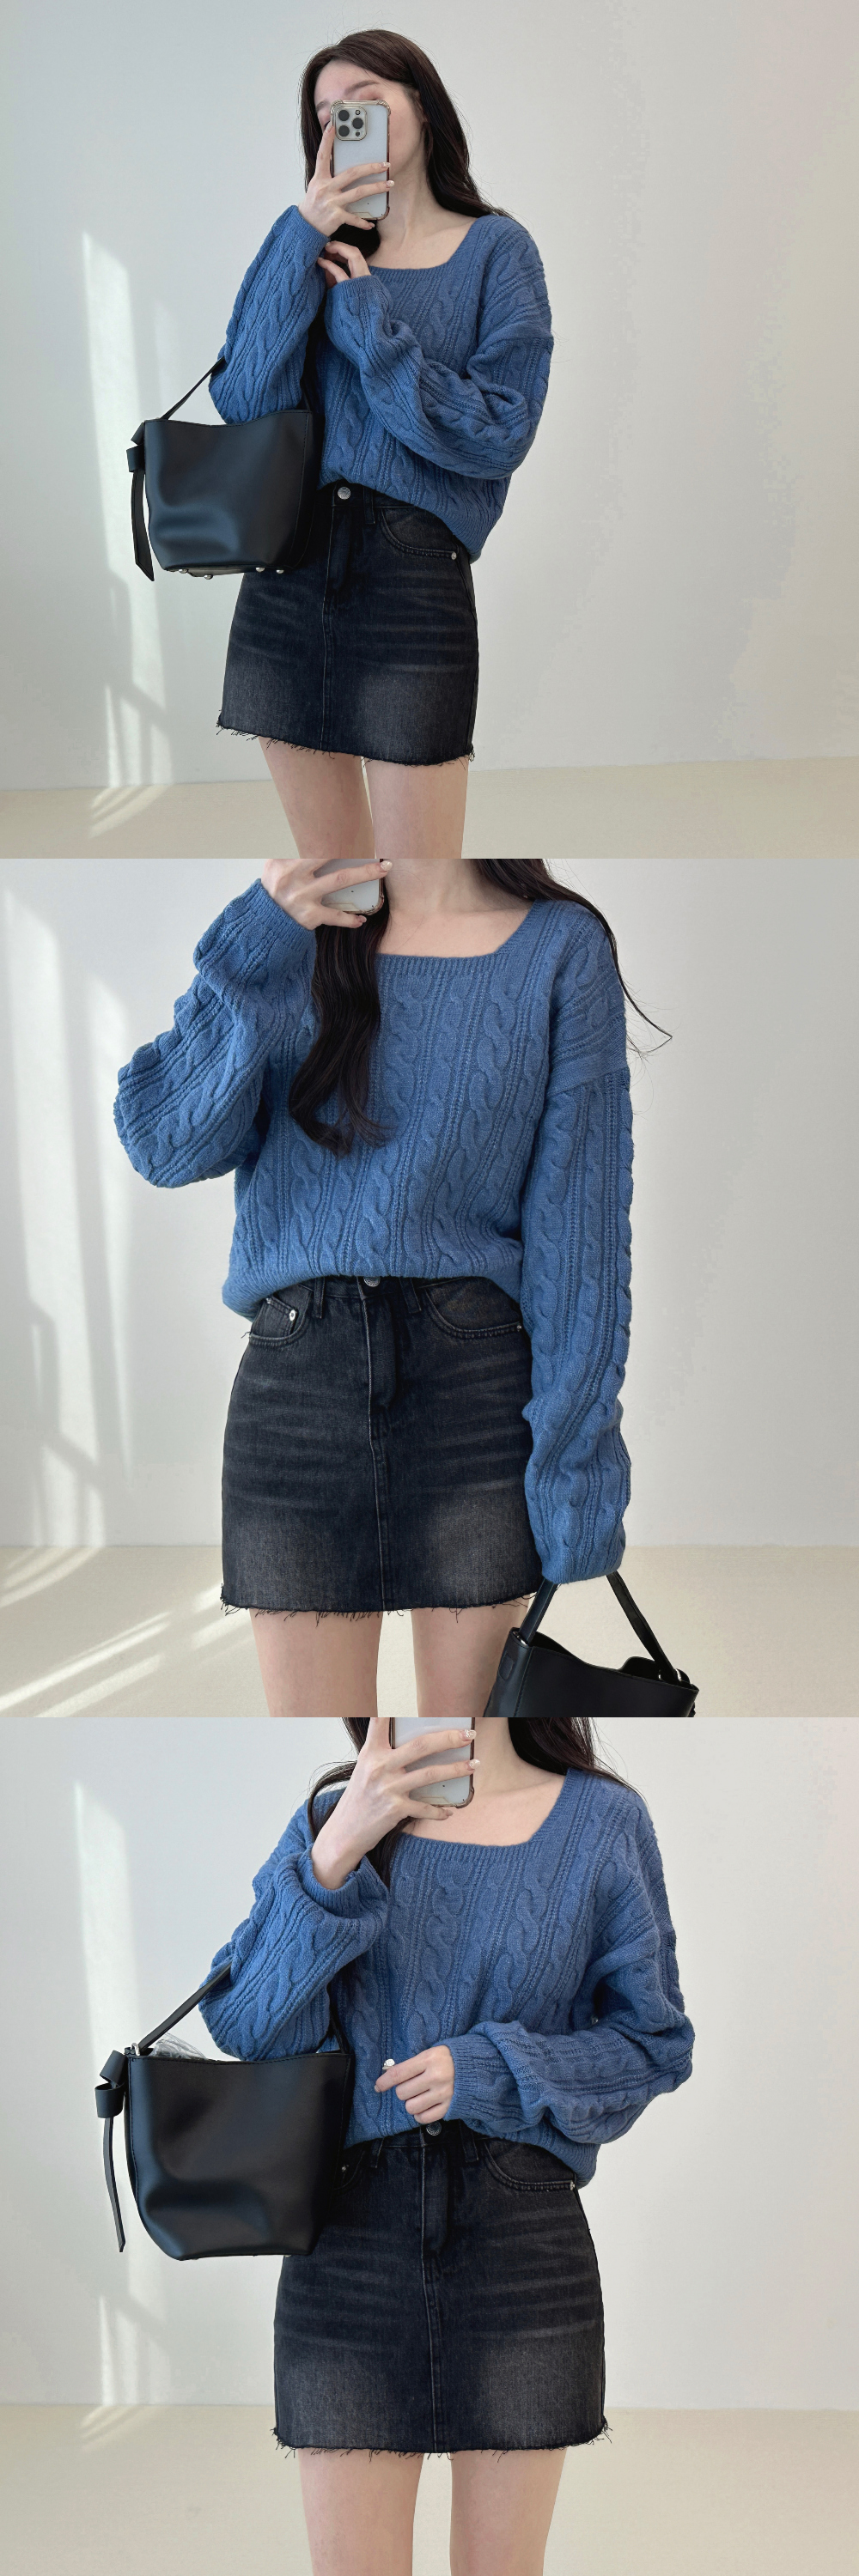 Square cropped knit